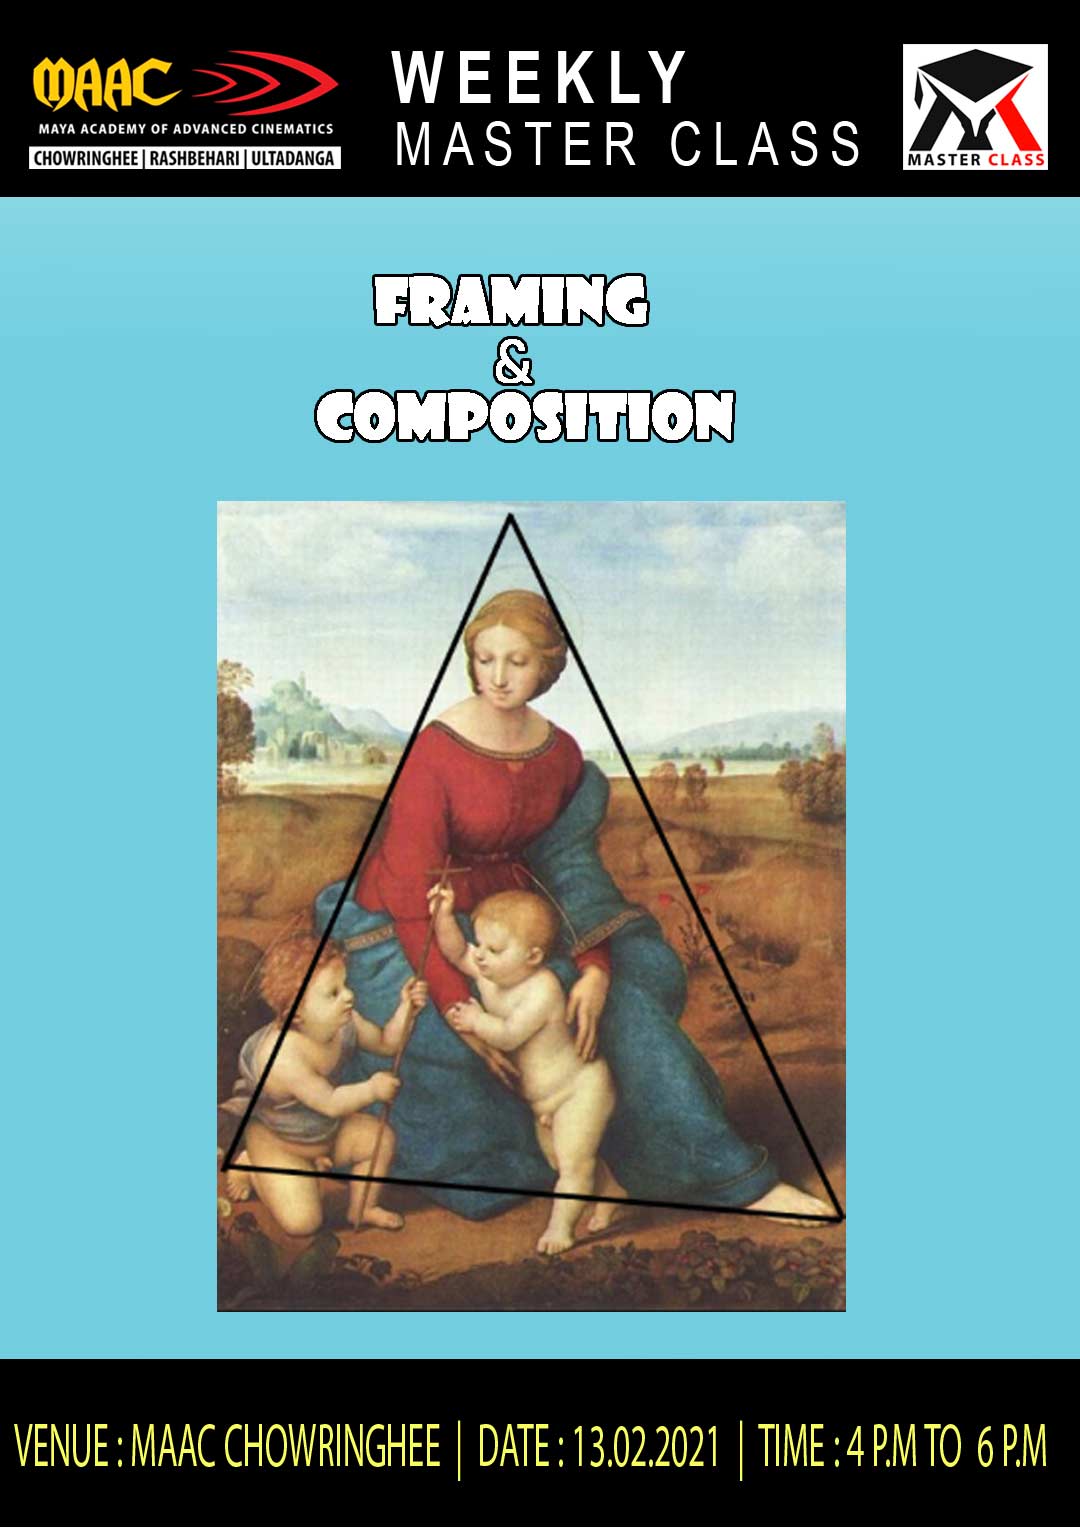 Weekly Master Class on Framing & Compositing